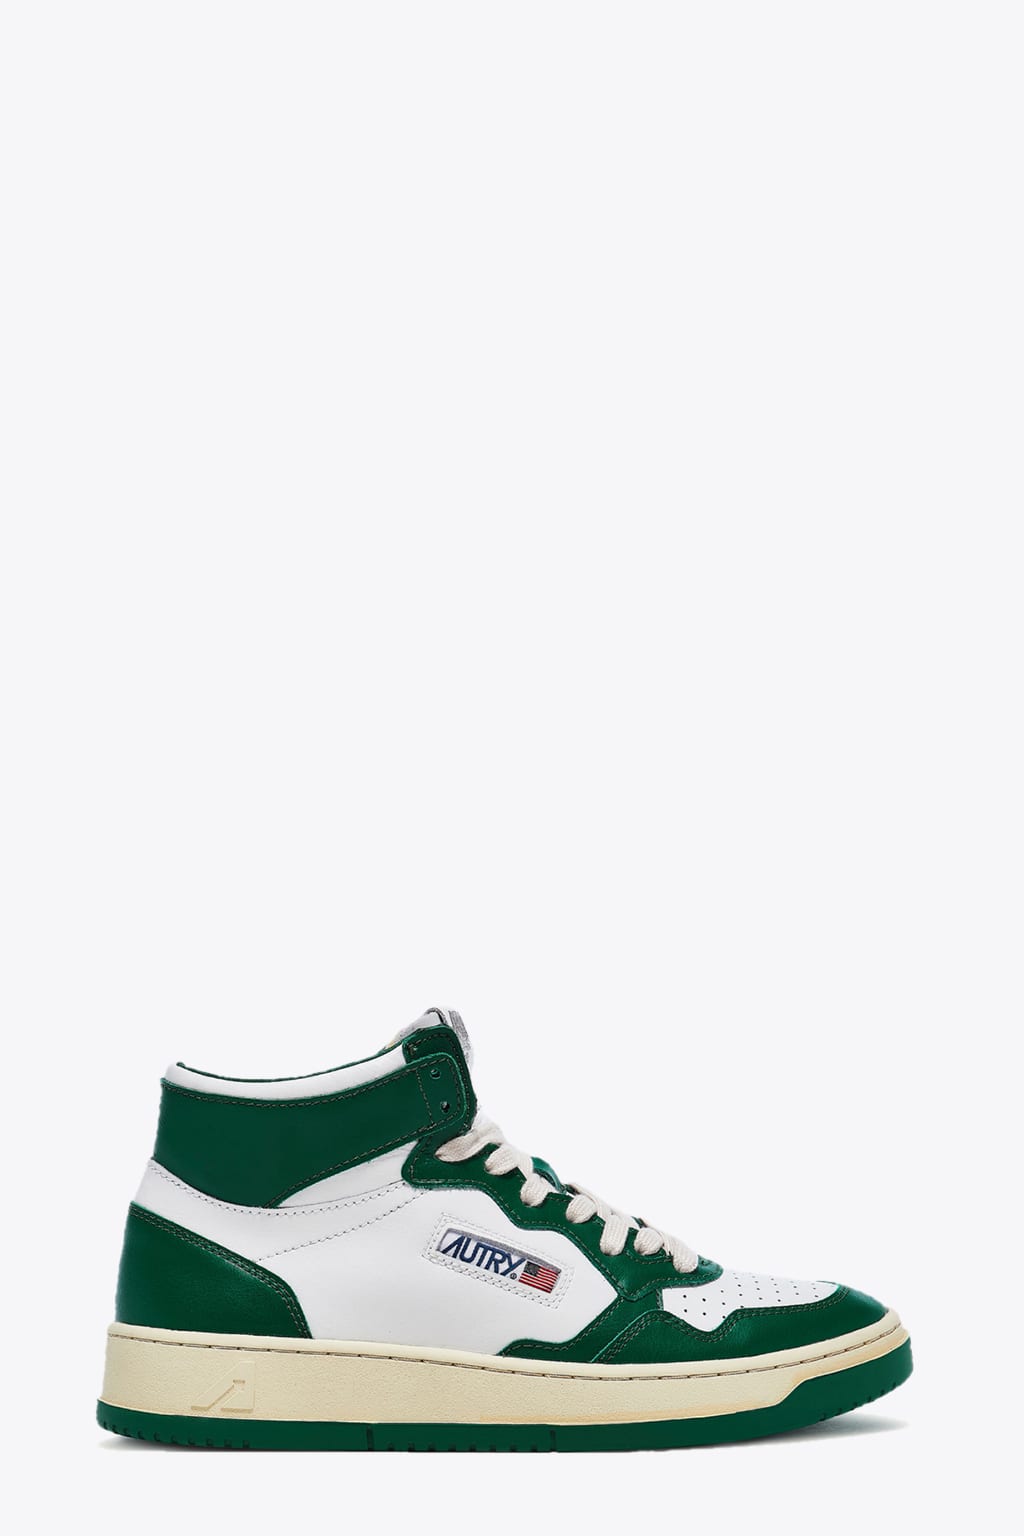 Autry 01 Mid Man Leat Mountain White and green leather mid top sneaker - Medalist Mid